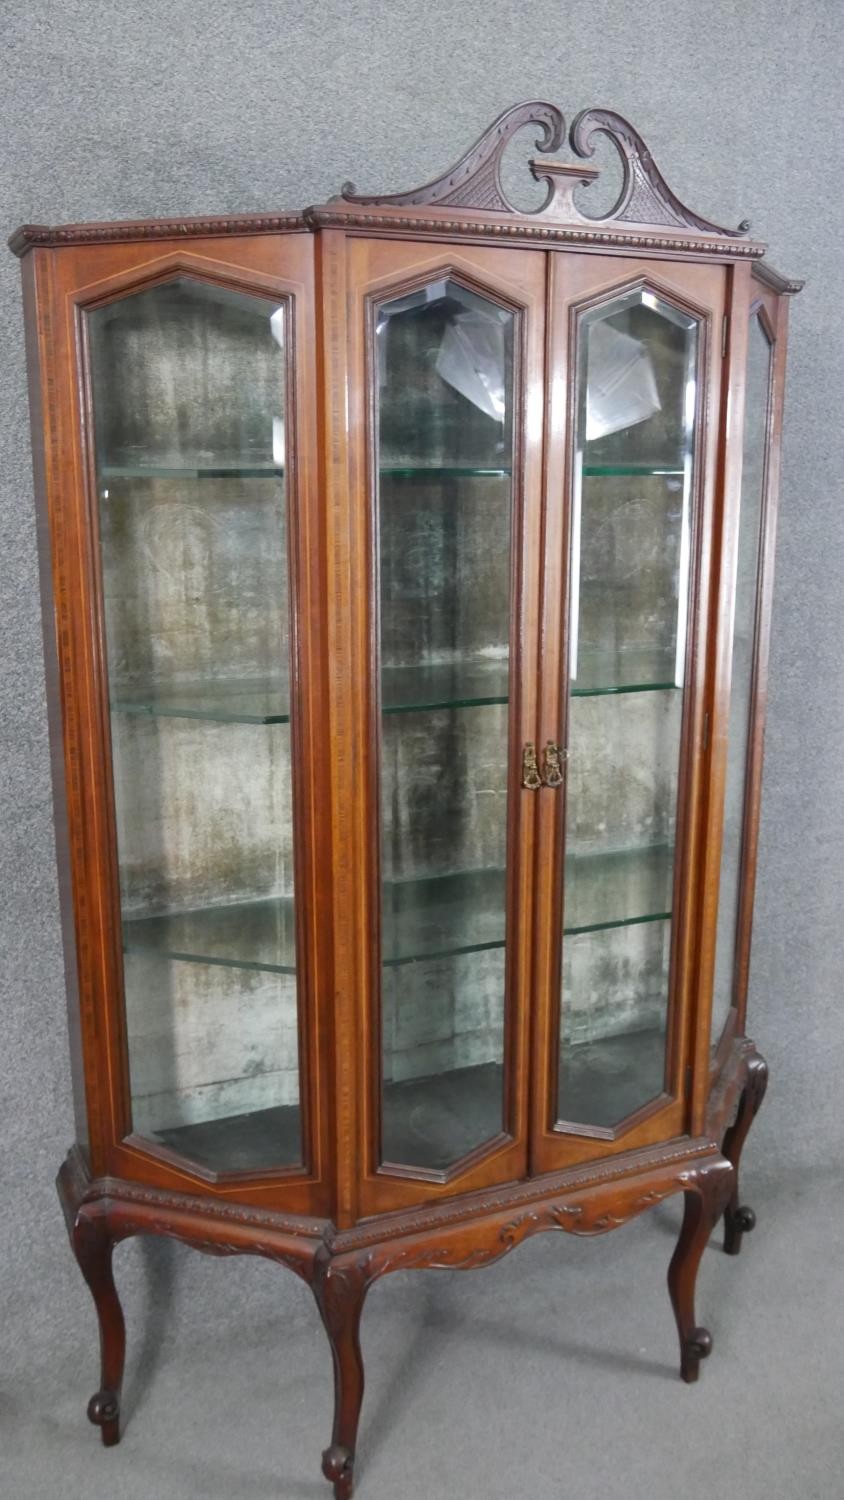 An Edwardian mahogany display cabinet, with a swan neck pediment, over a pair of bevelled glass - Image 7 of 8